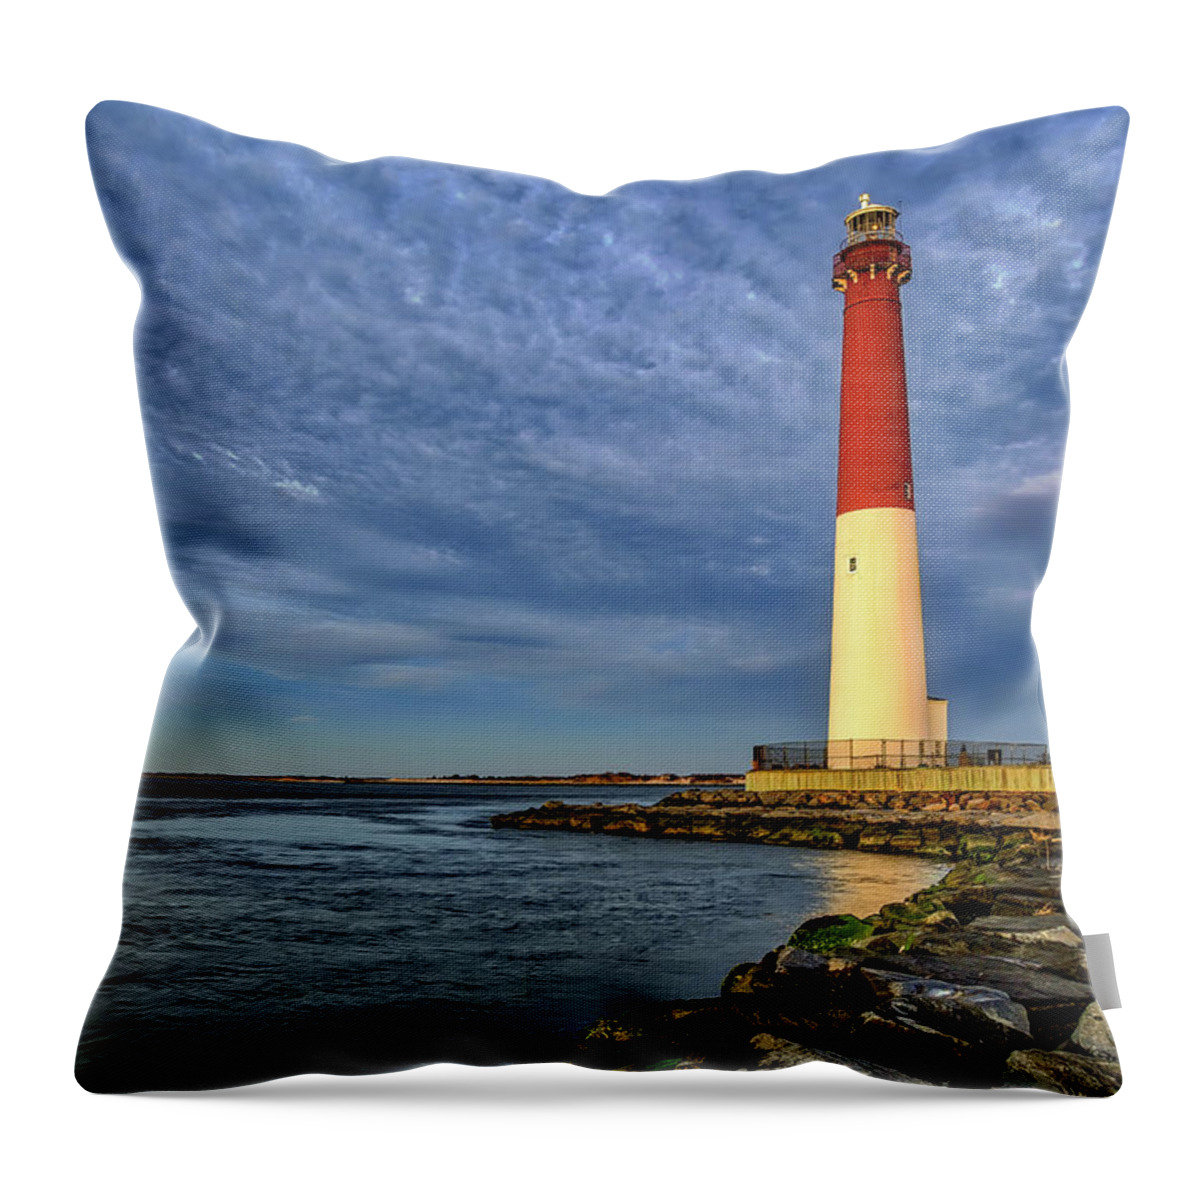 Barnegat Light Throw Pillow featuring the photograph Barnegat Lighthouse Afternoon by Susan Candelario